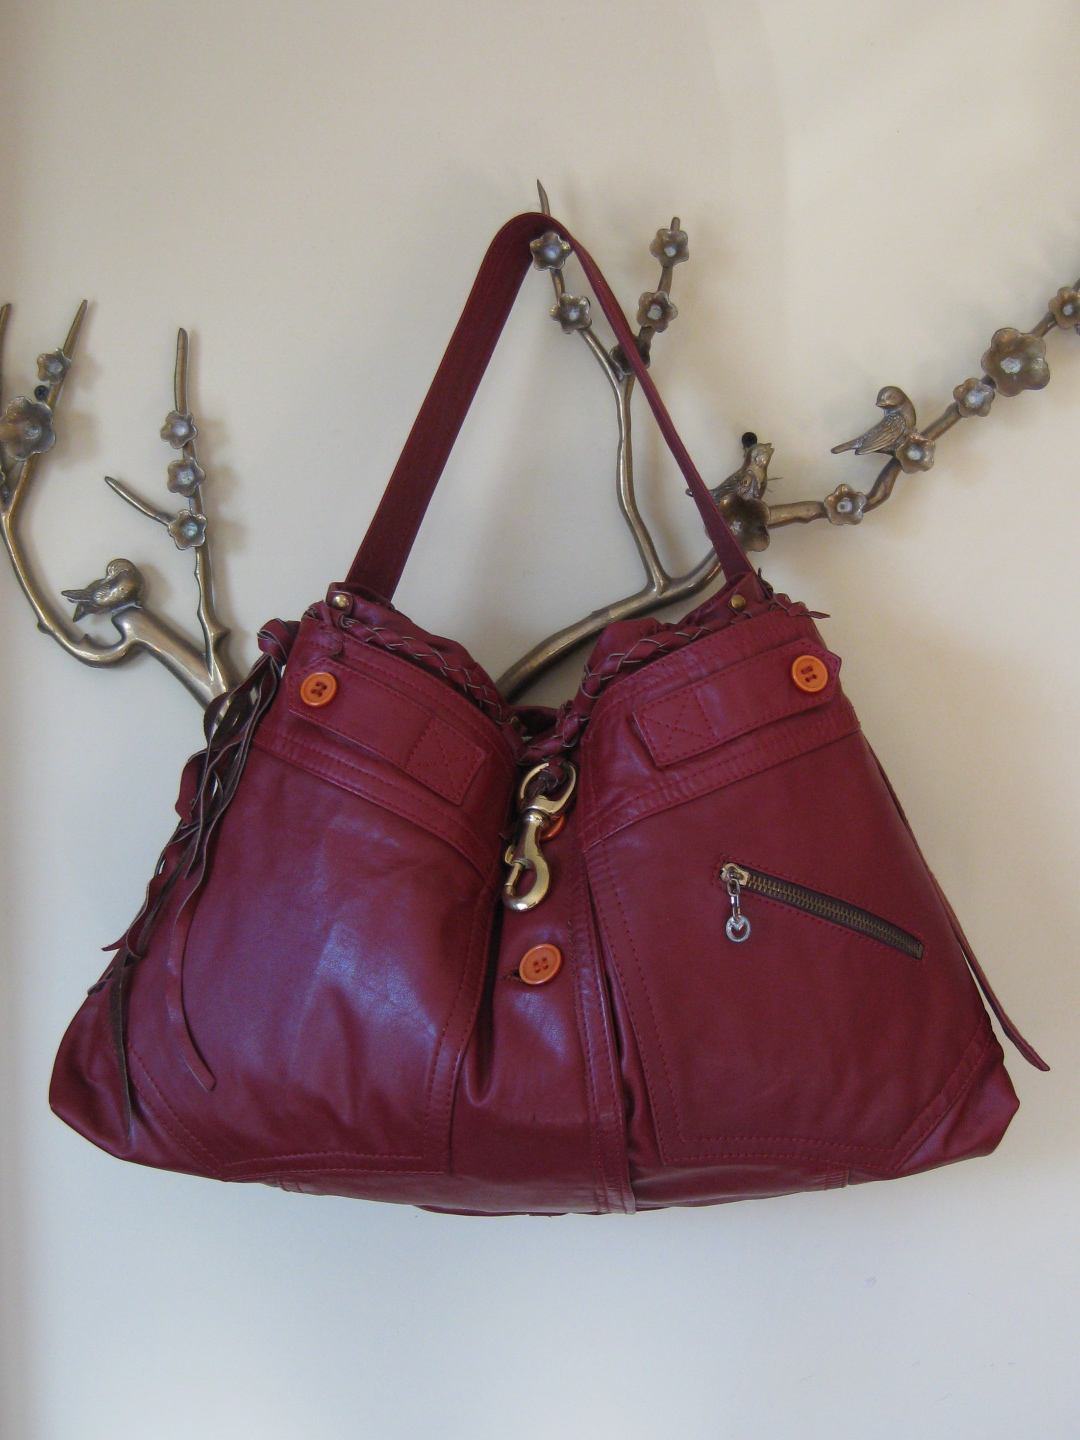 Repurposed leather handbag – Sewing Projects | www.strongerinc.org